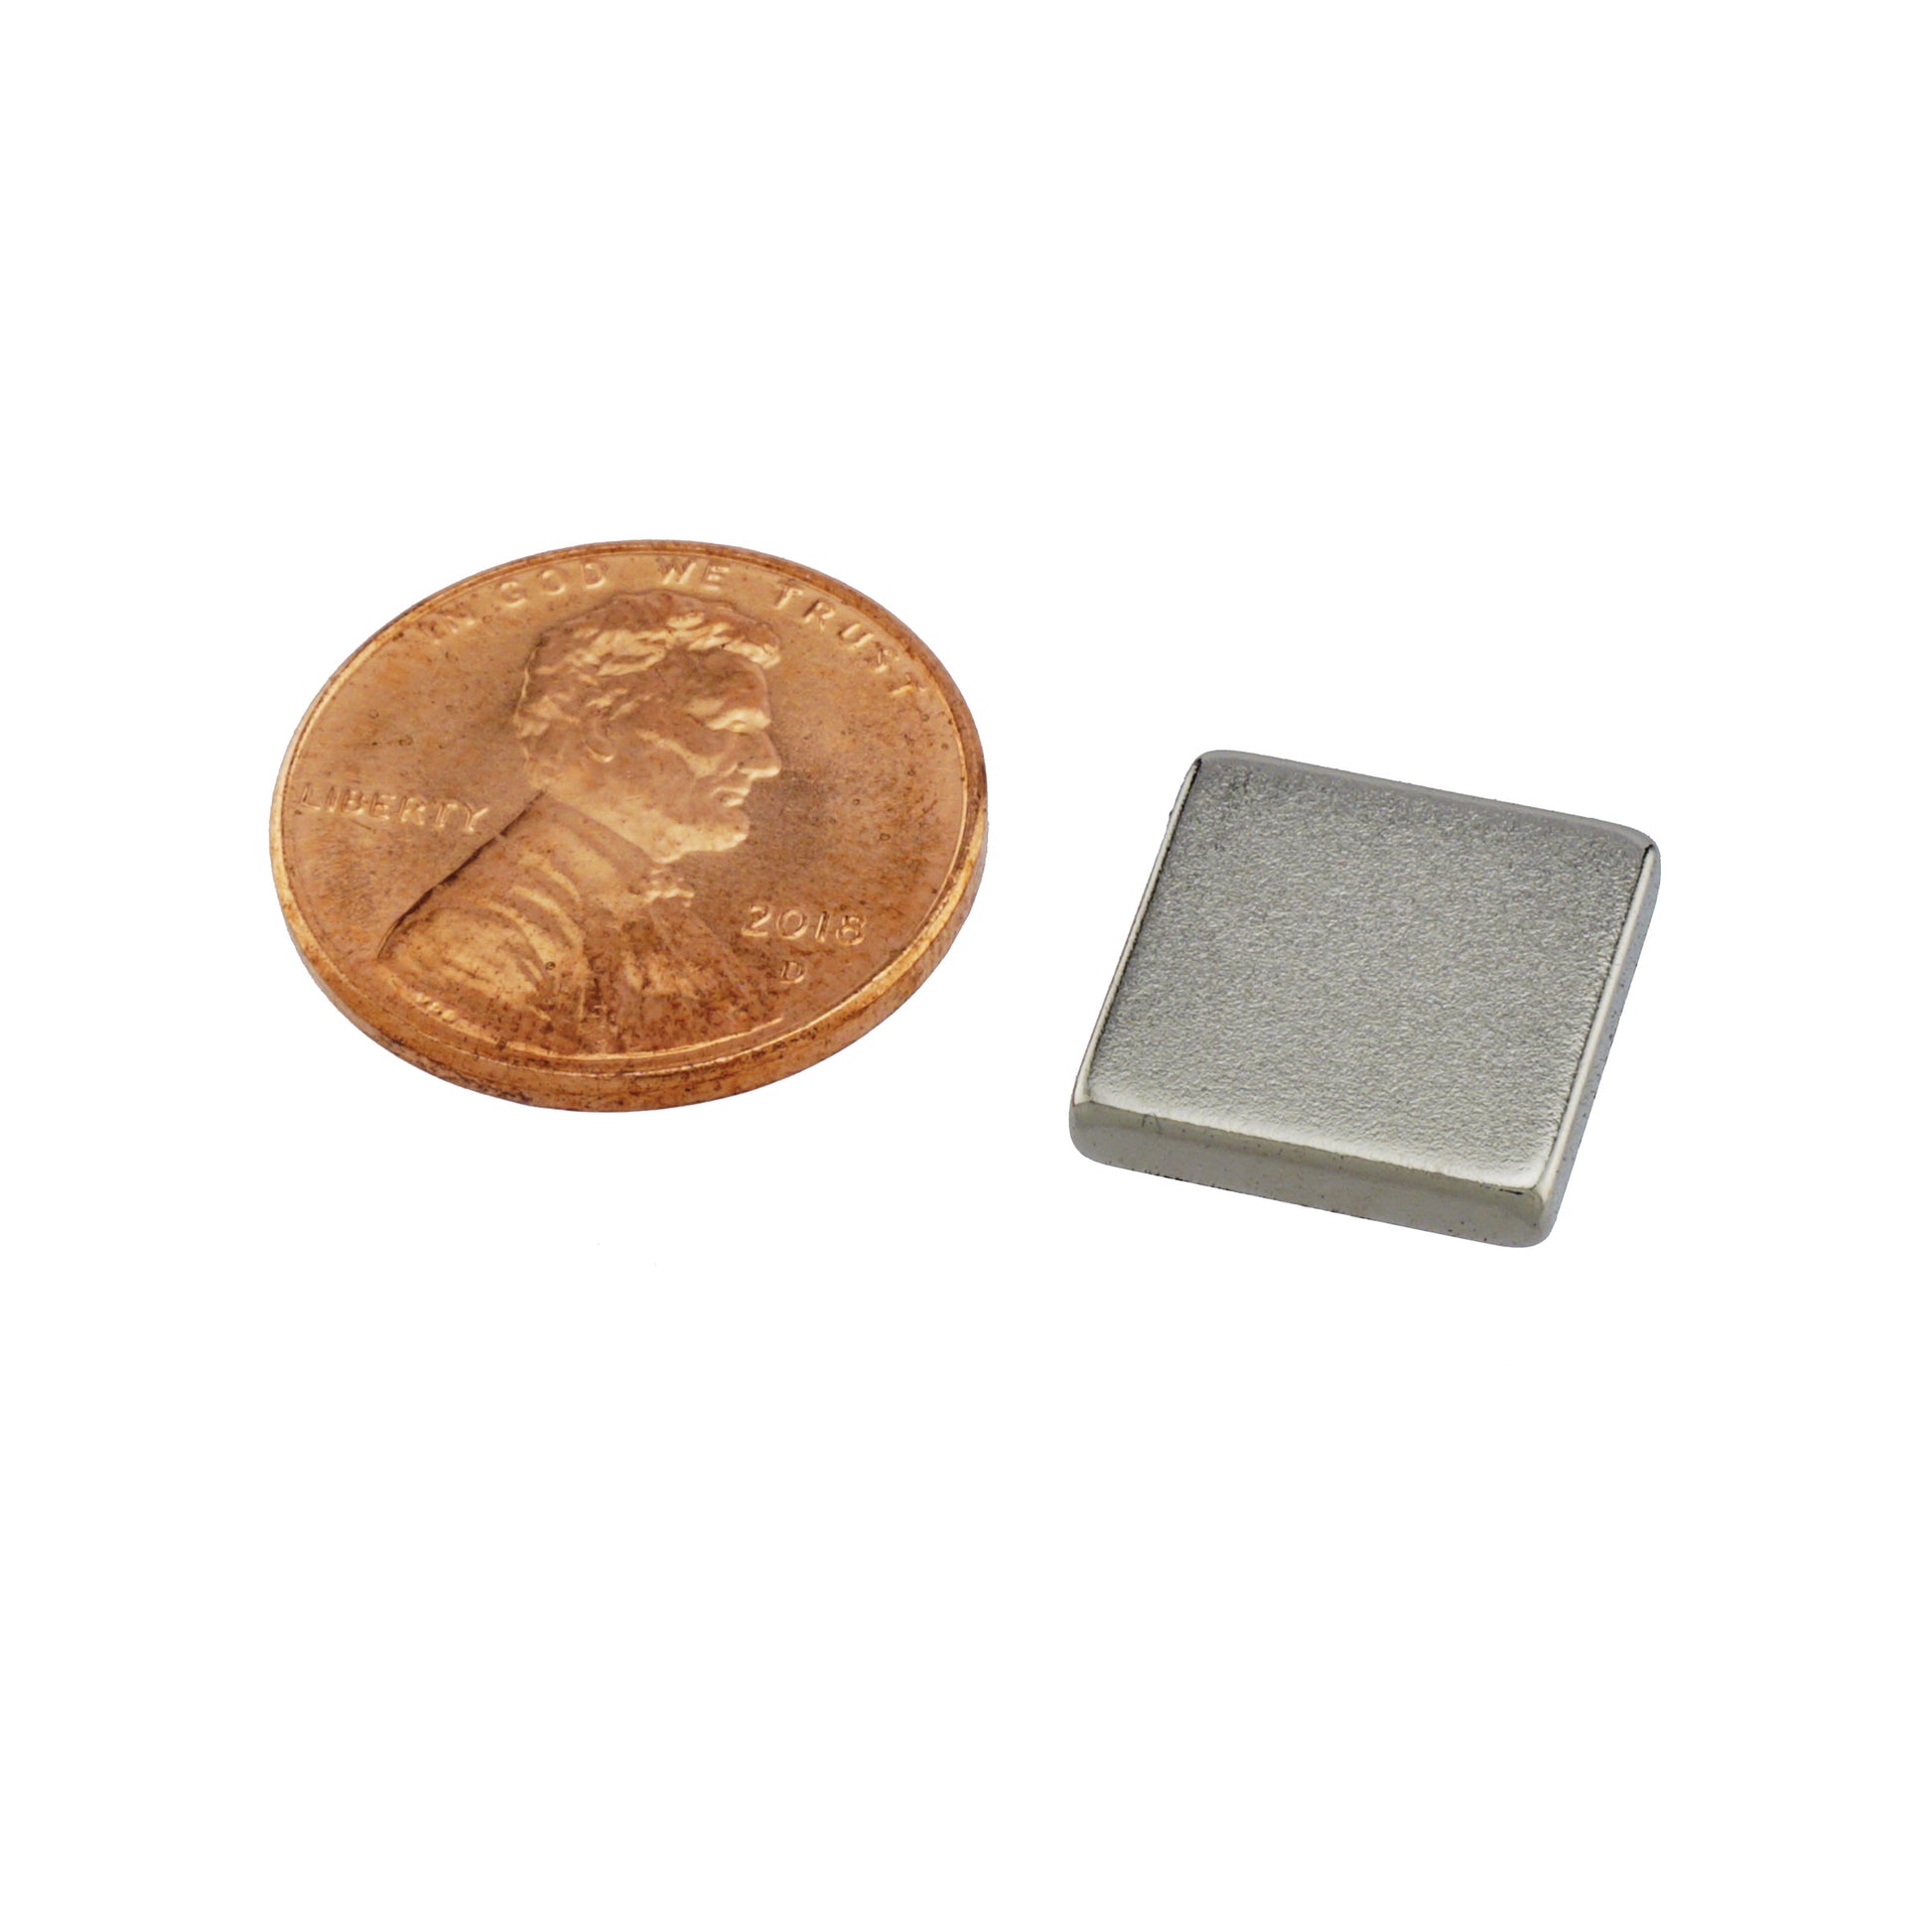 Load image into Gallery viewer, NB001004N Neodymium Block Magnet - Compared to Penny for Size Reference